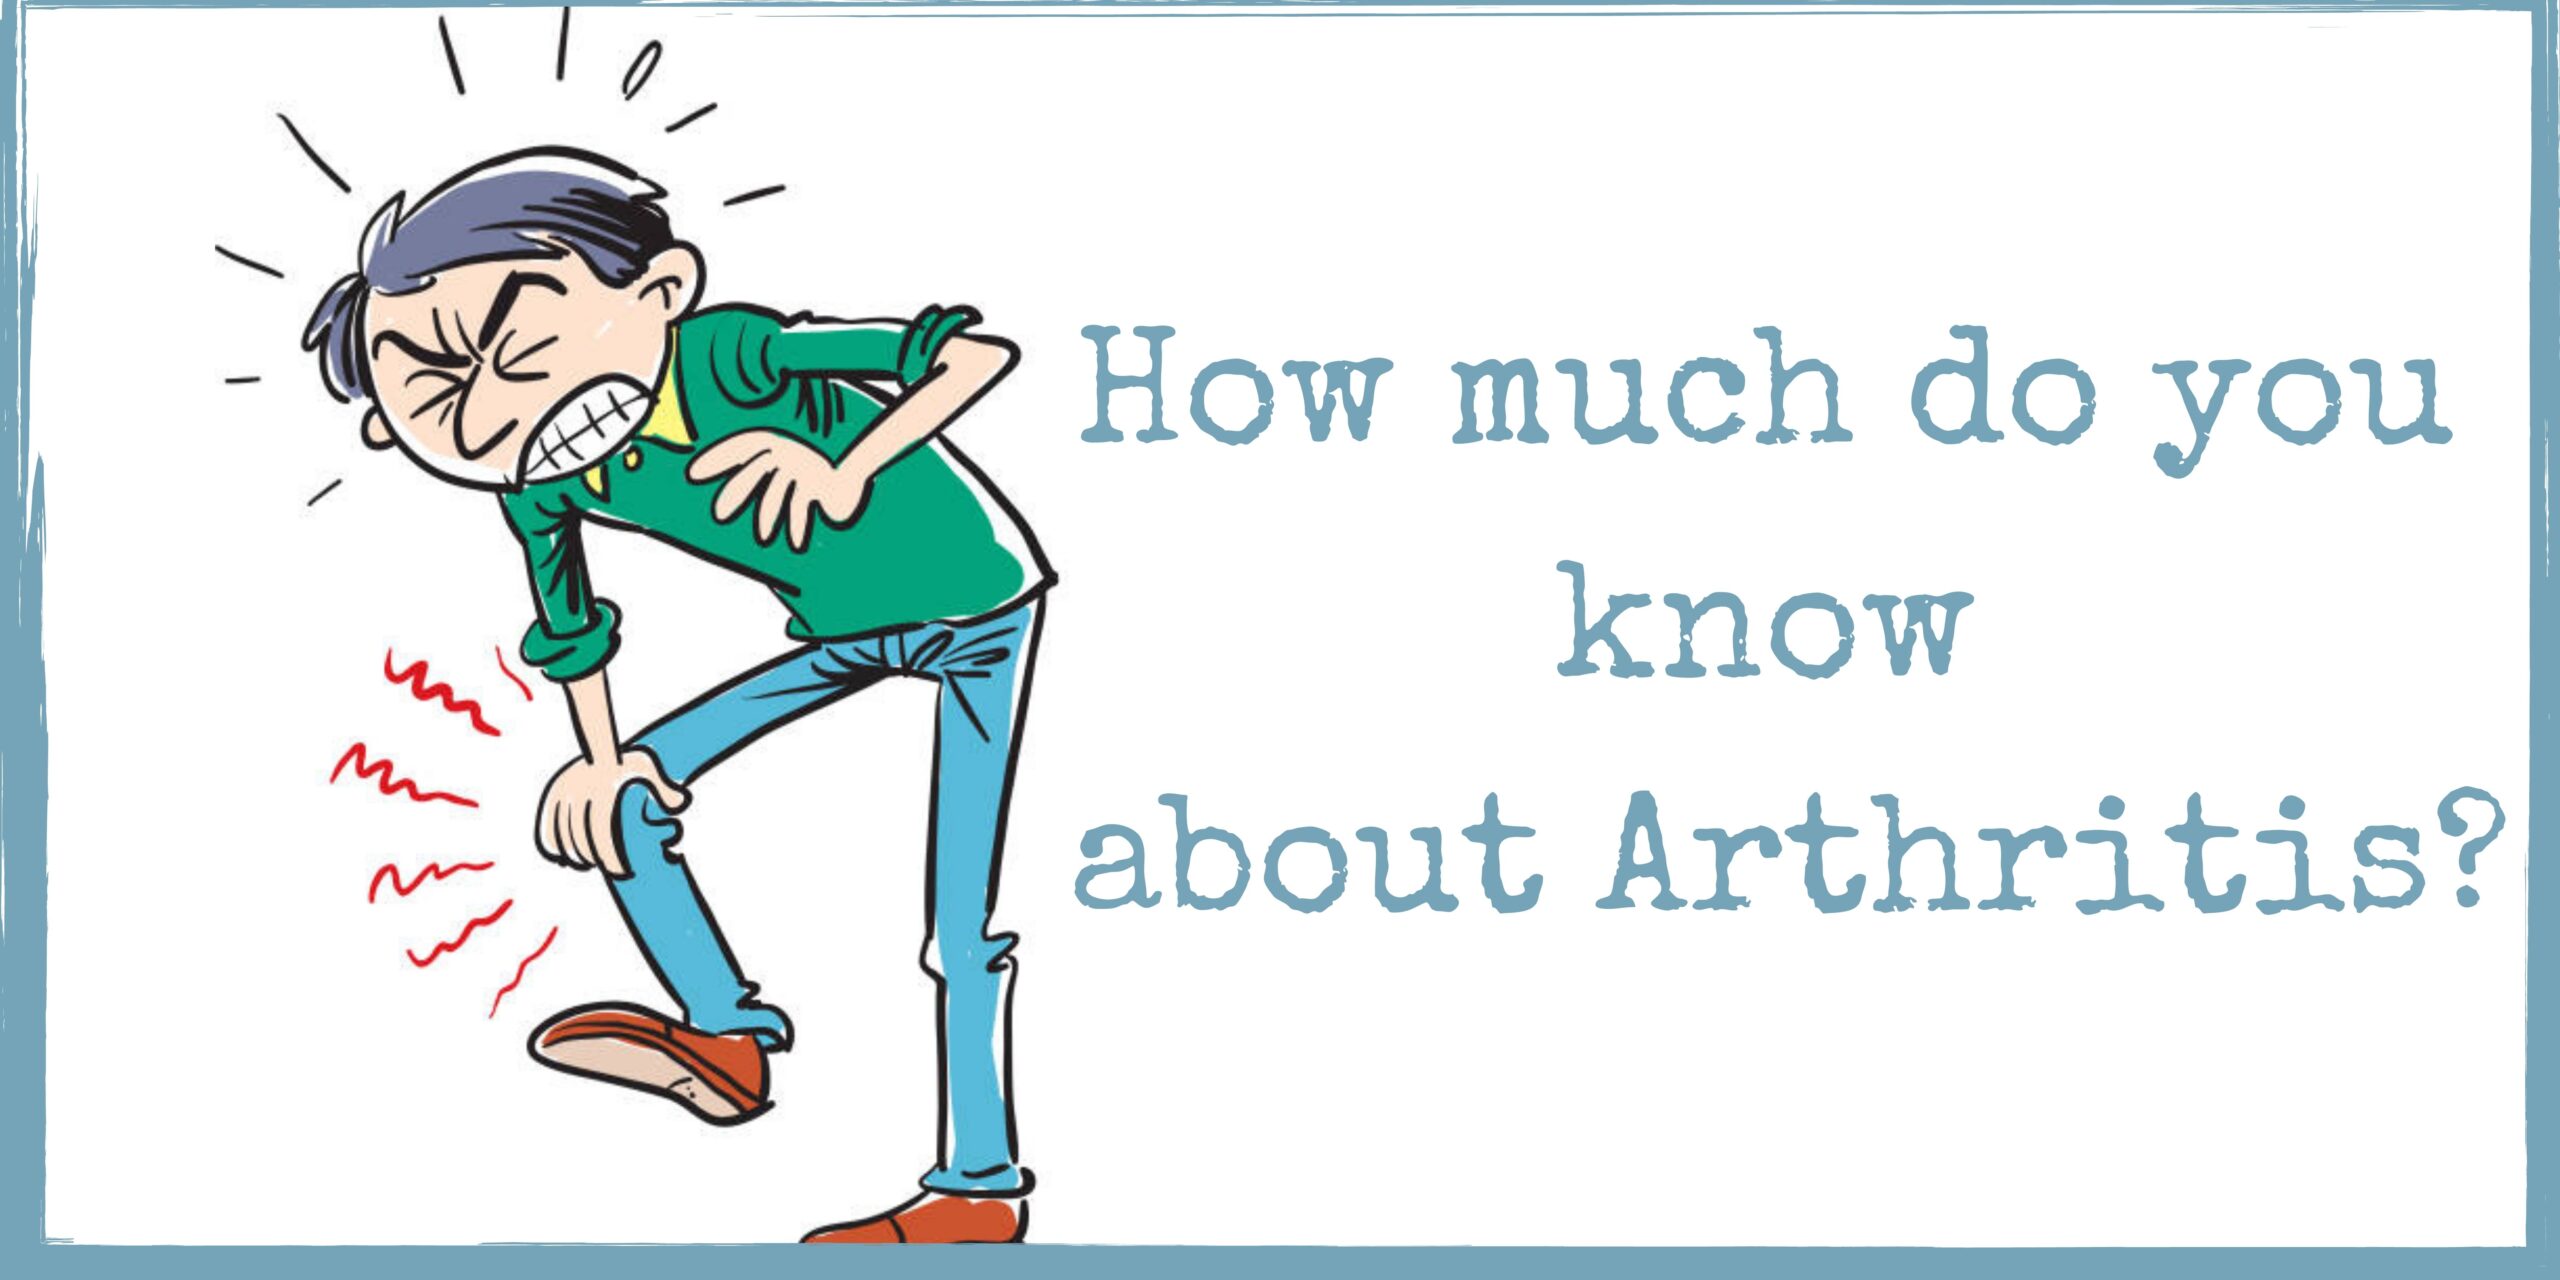 How Much Do You Know about Arthritis?